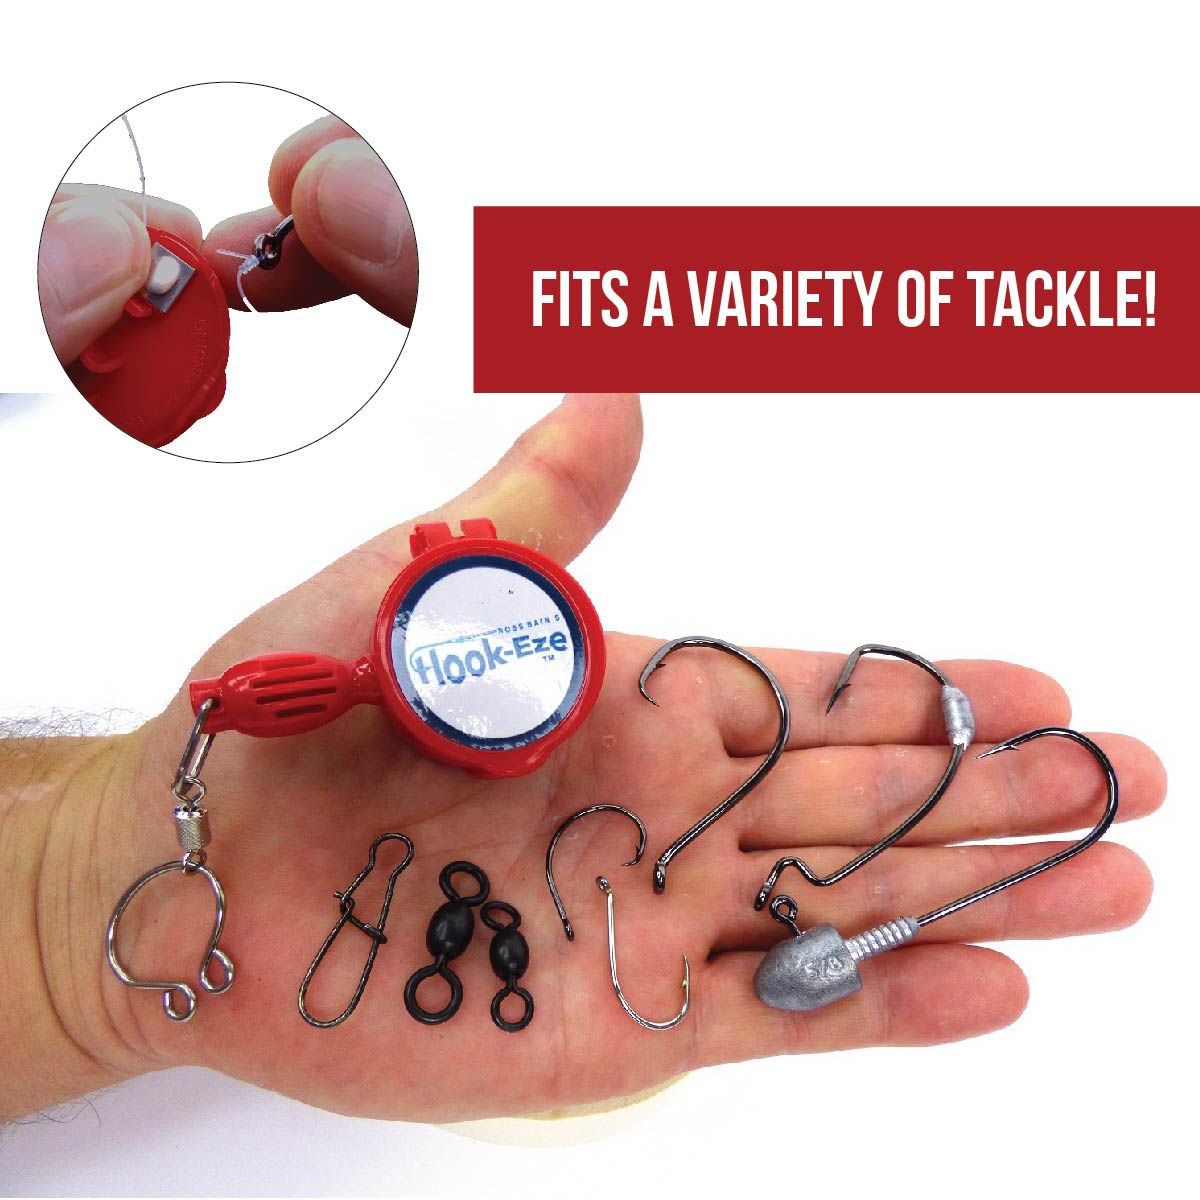 Hook-Eze Fishing Knot Tying Tools (Large & Nail Knot) | Pack of 4